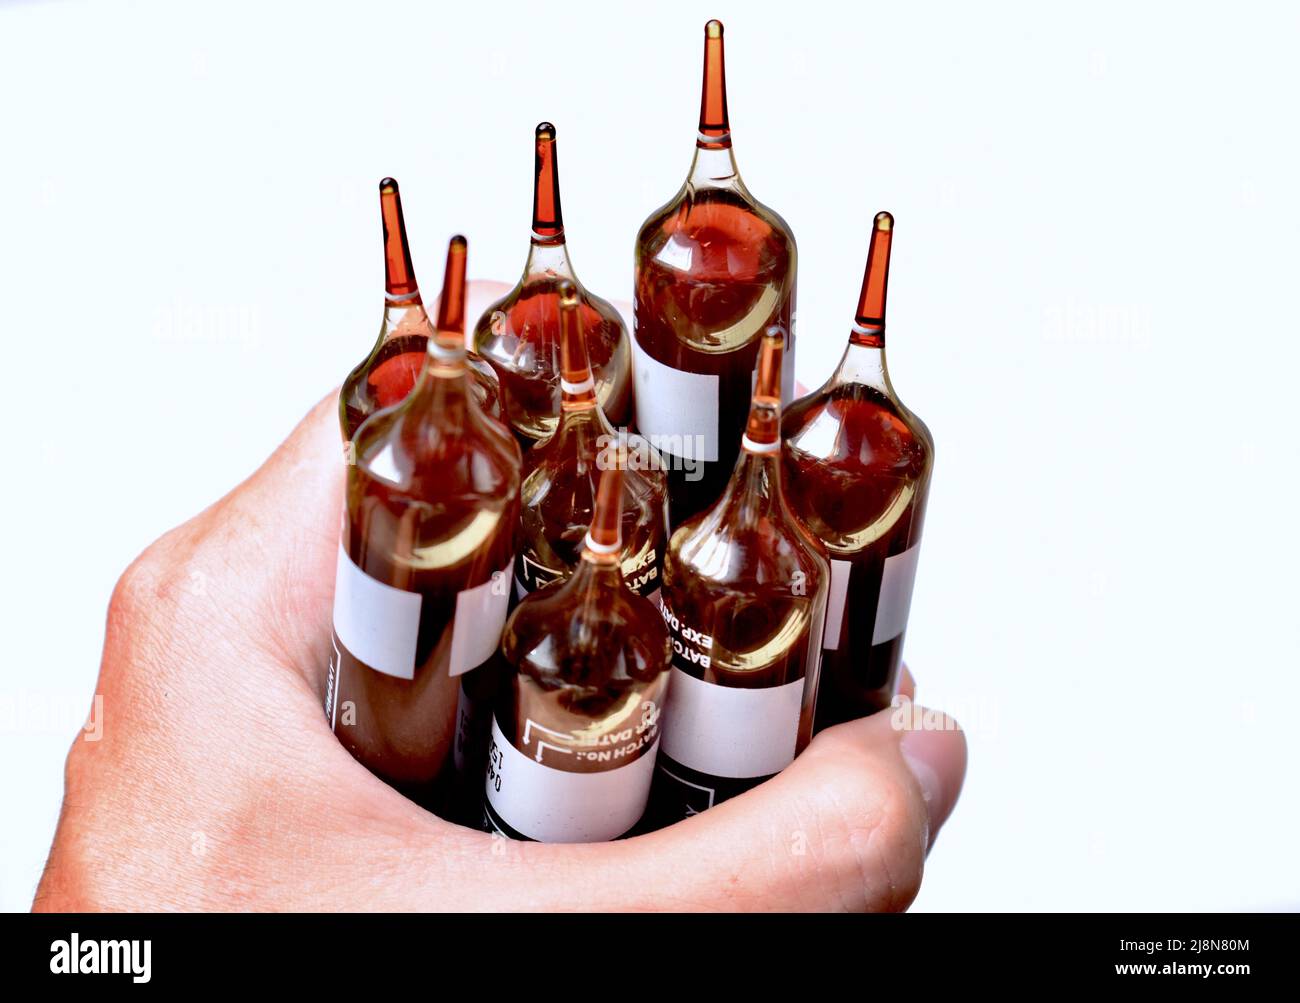 Glass ampoules containing iron supplement solution to treat anaemia. Stock Photo